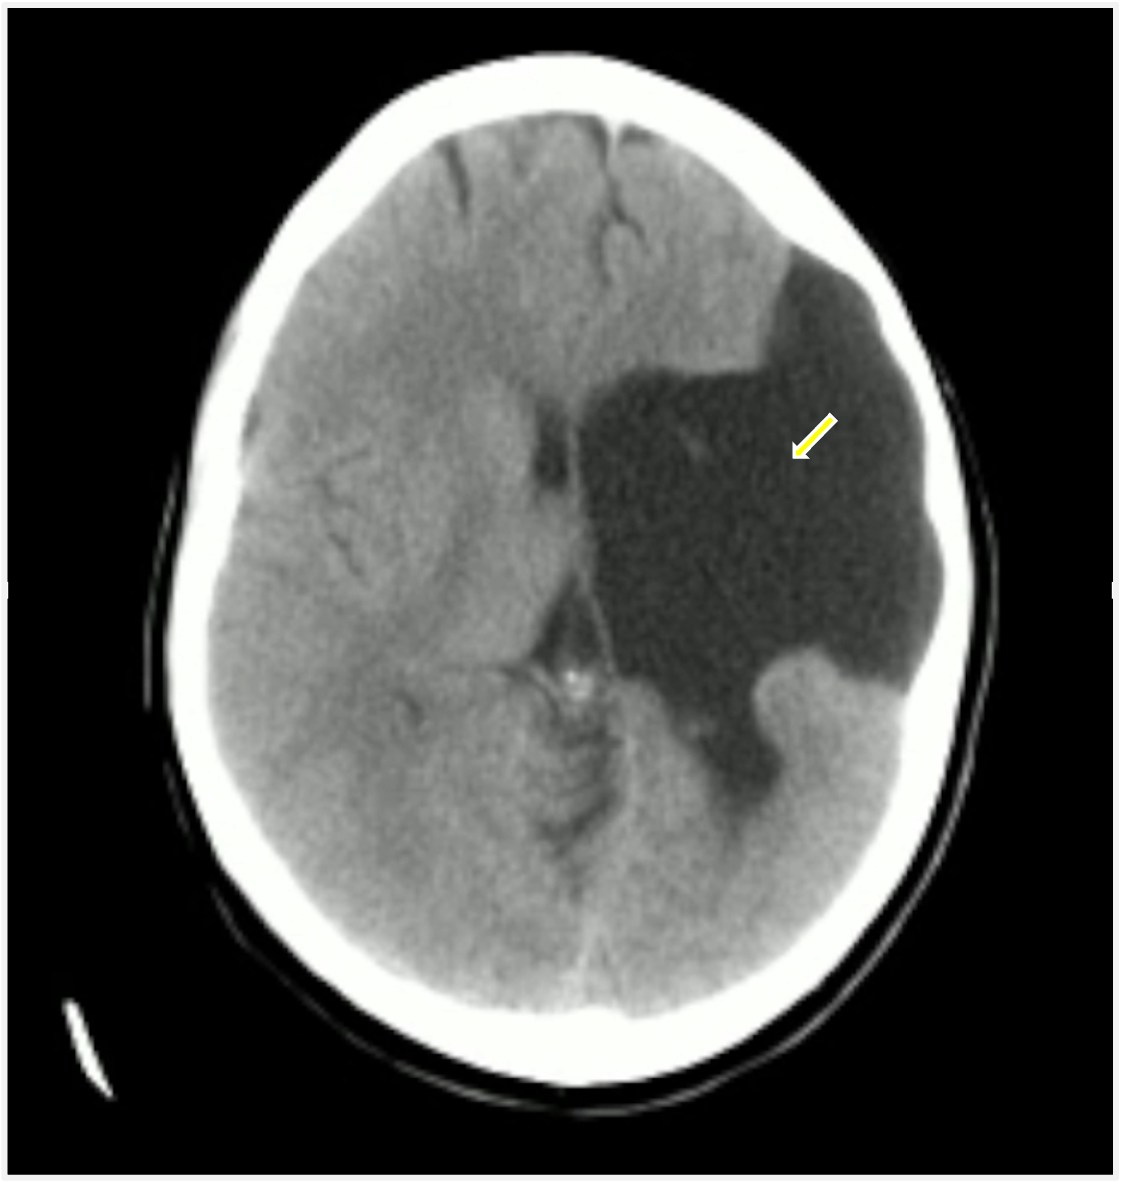 Image IQ Quiz: 36-year-old with Chronic/Developmental Cognitive Impairment and New Seizure Disorder